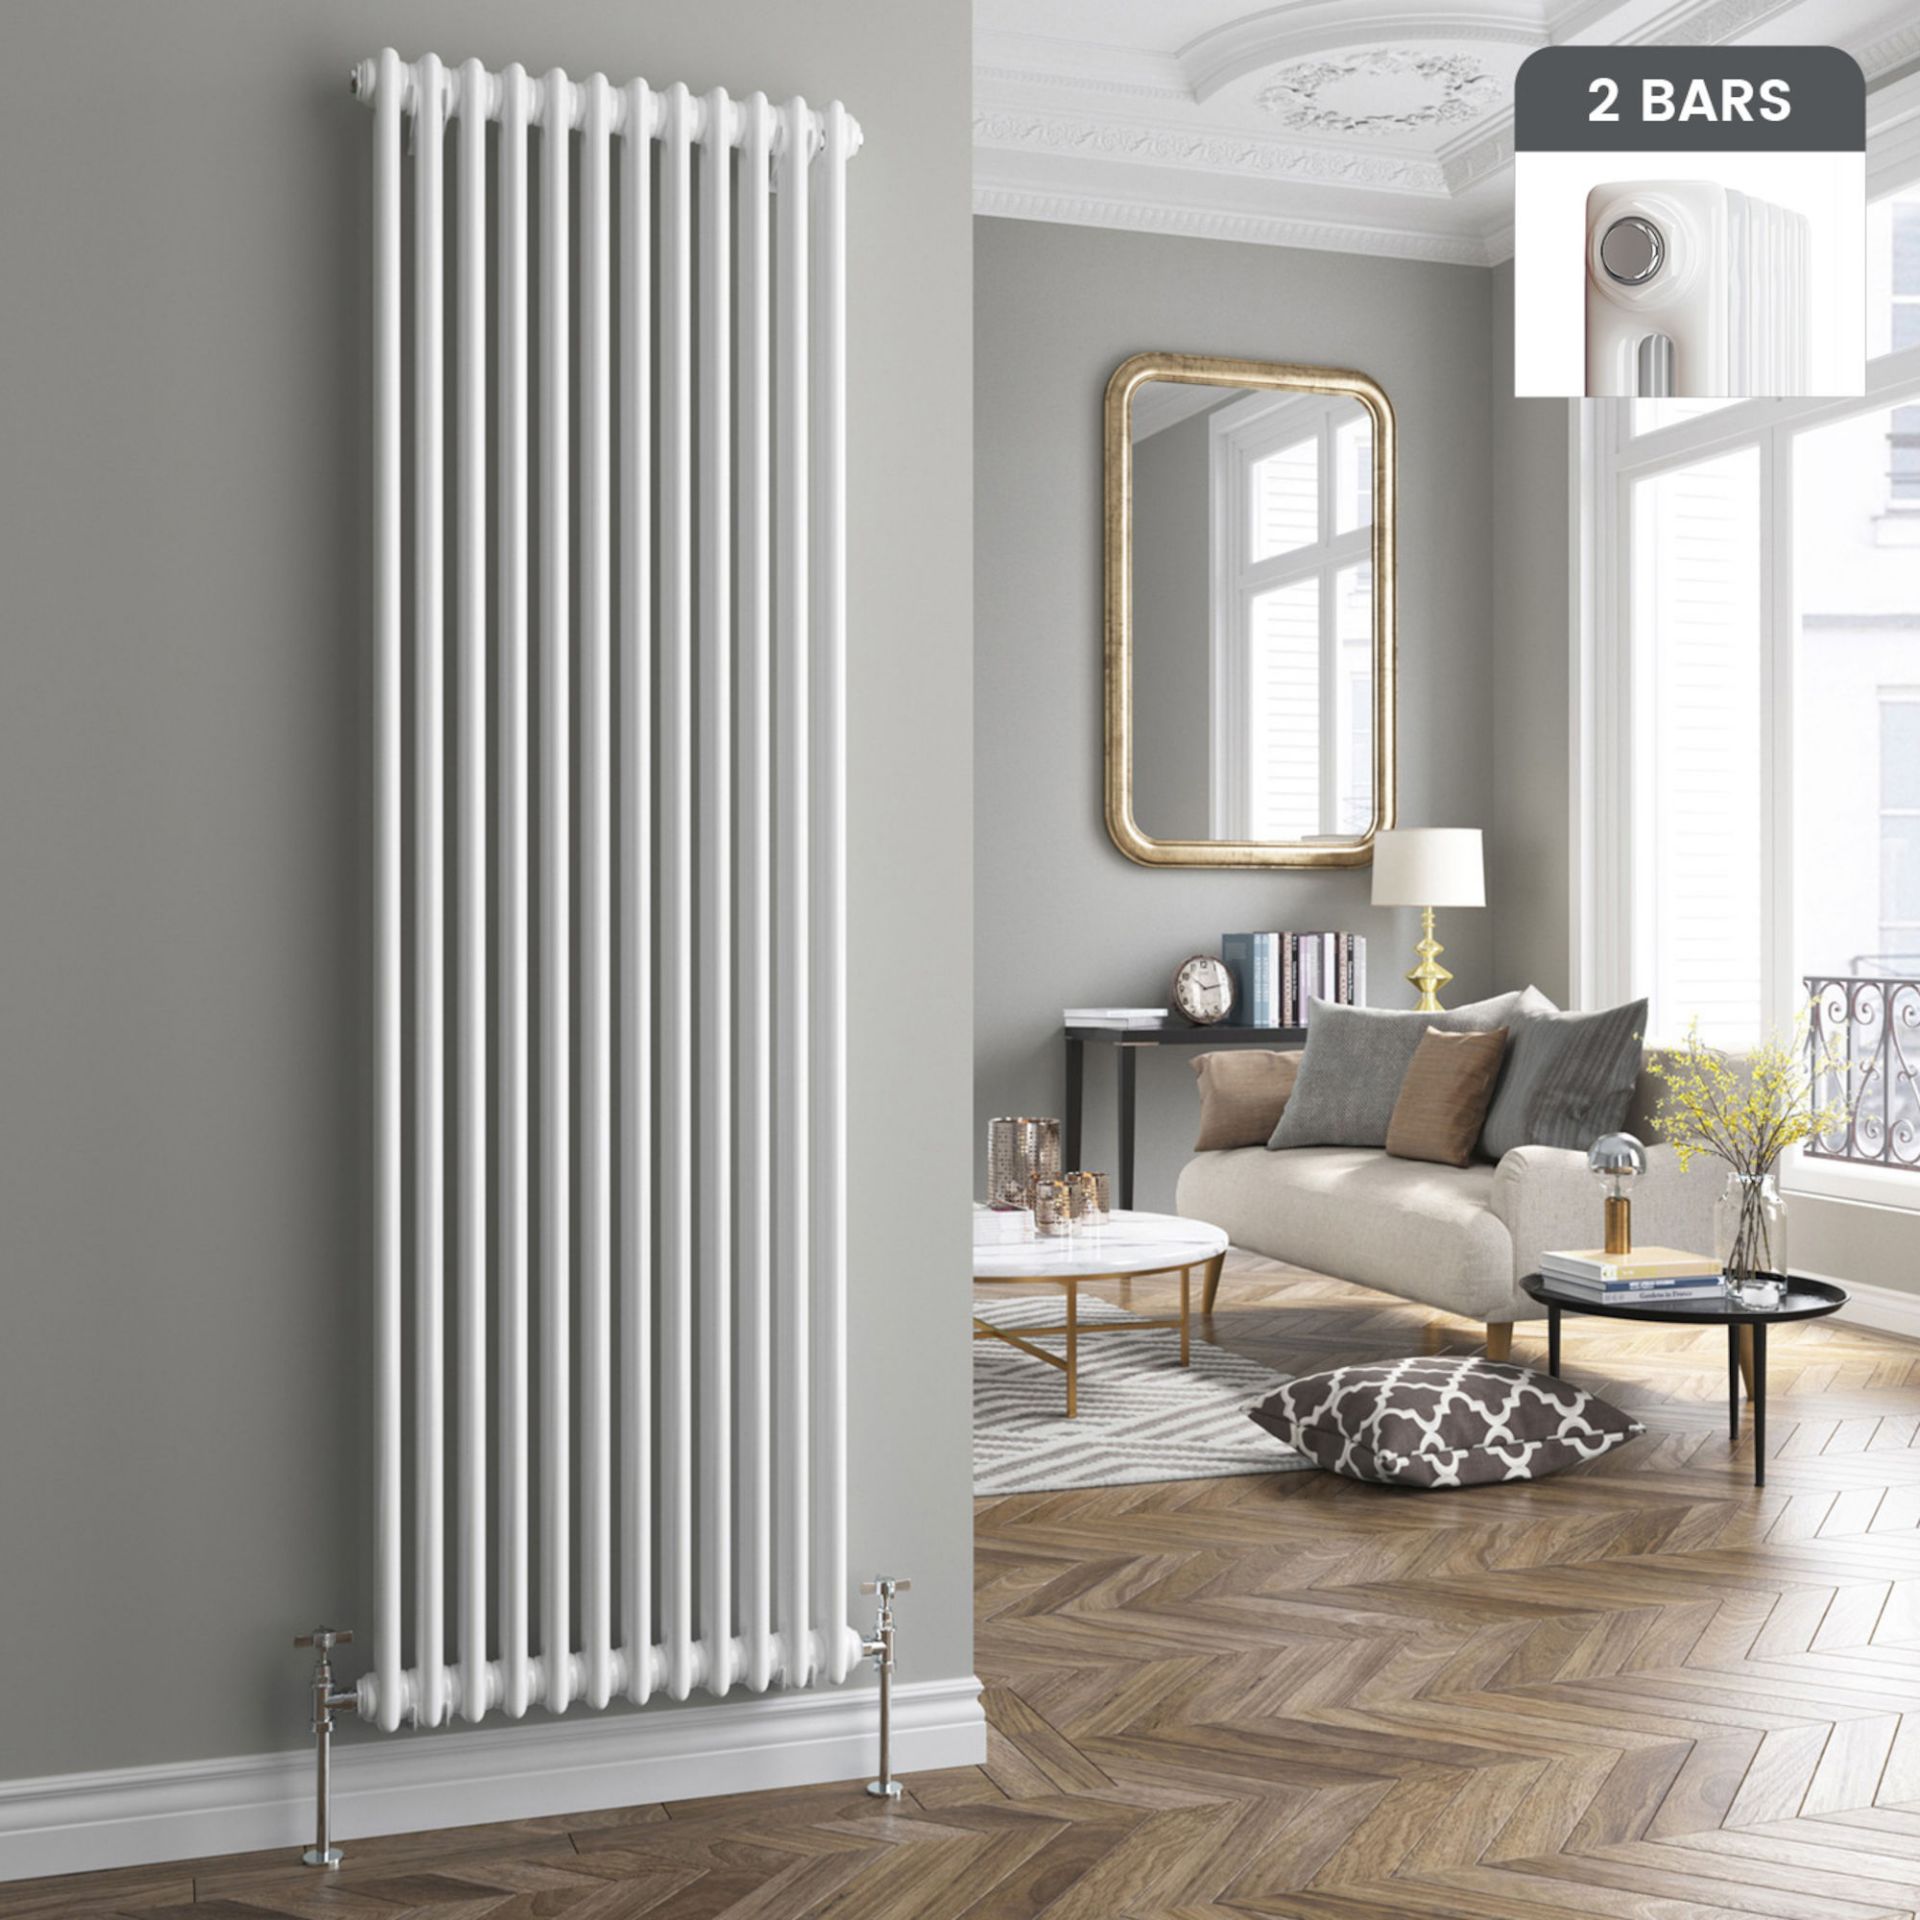 (RK107) 2000x490mm White Double Panel Vertical Colosseum Traditional Radiator. RRP £419.99. Fo...